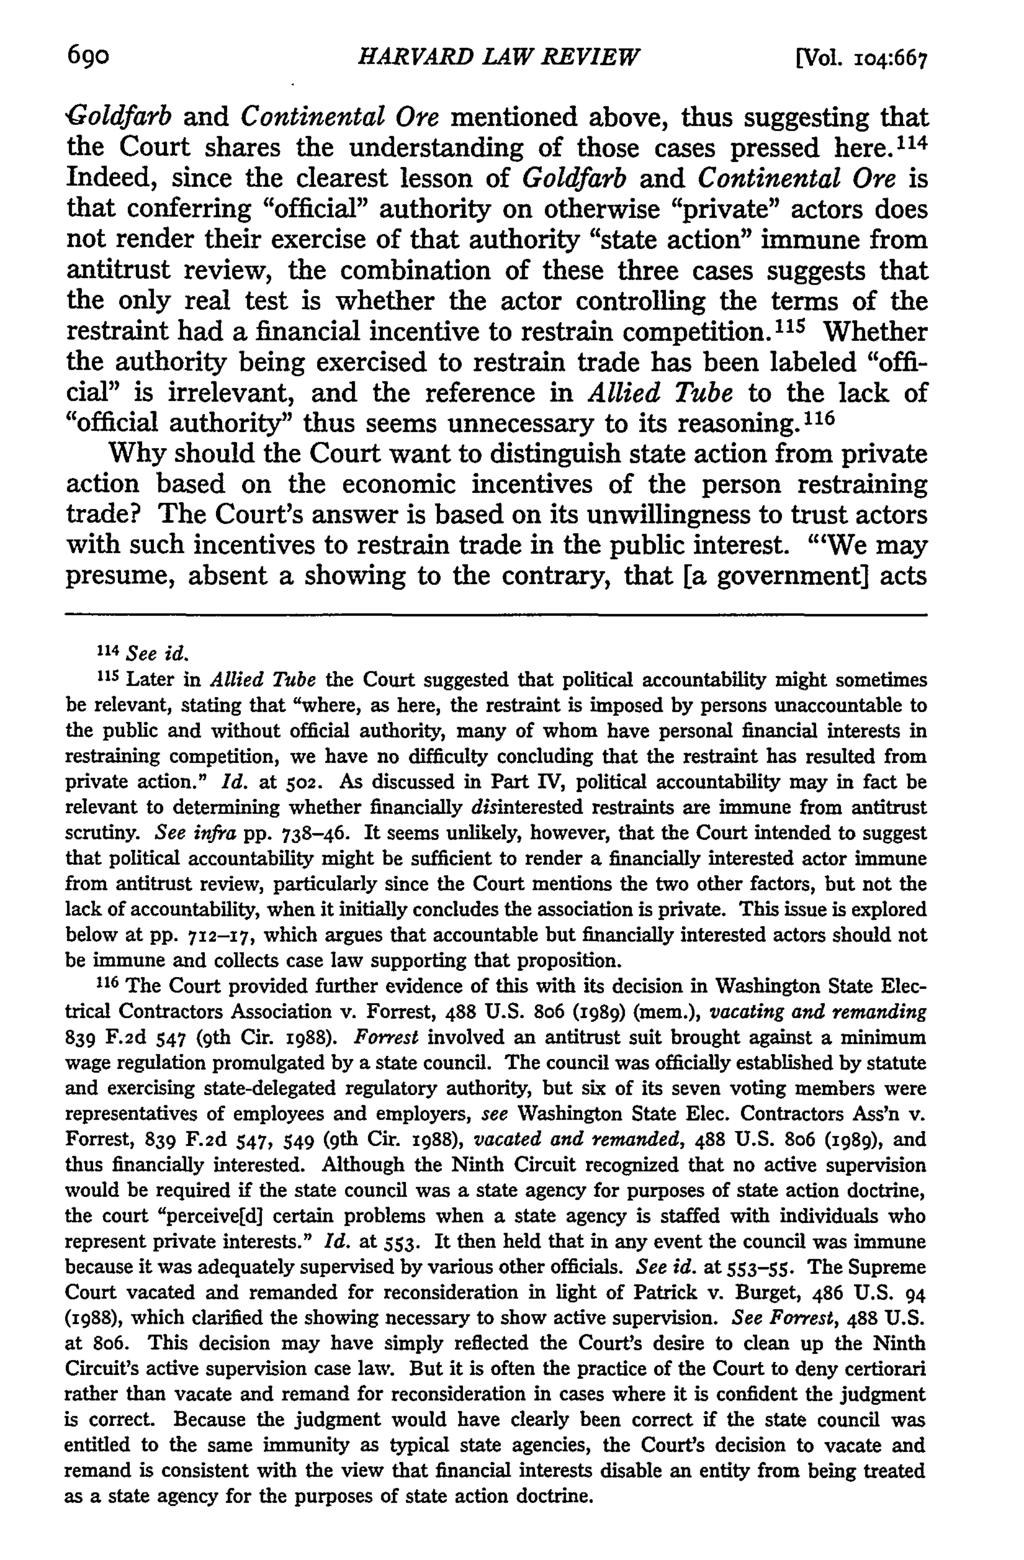 6go HARVARD LAW REVIEW -Goldfarb and Continental Ore mentioned above, thus suggesting that the Court shares the understanding of those cases pressed here.